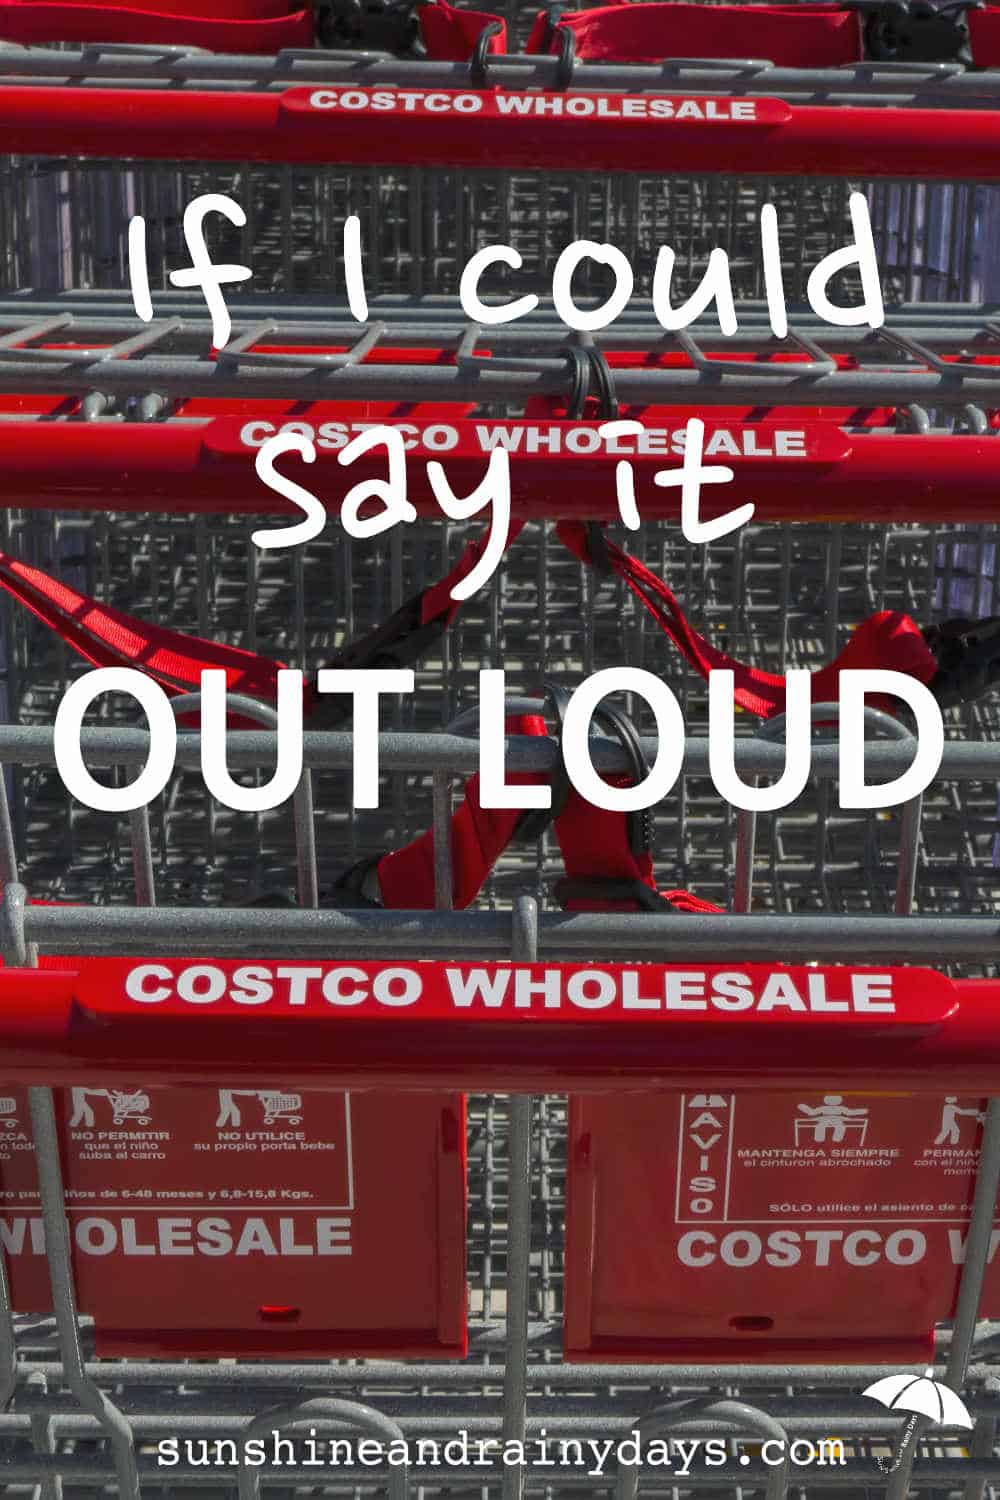 Do you ever wish you could say exactly what you're thinking out loud? Loud enough for oblivious people to hear? When we're shopping at Costco, I sometimes wish I could say it OUT LOUD!